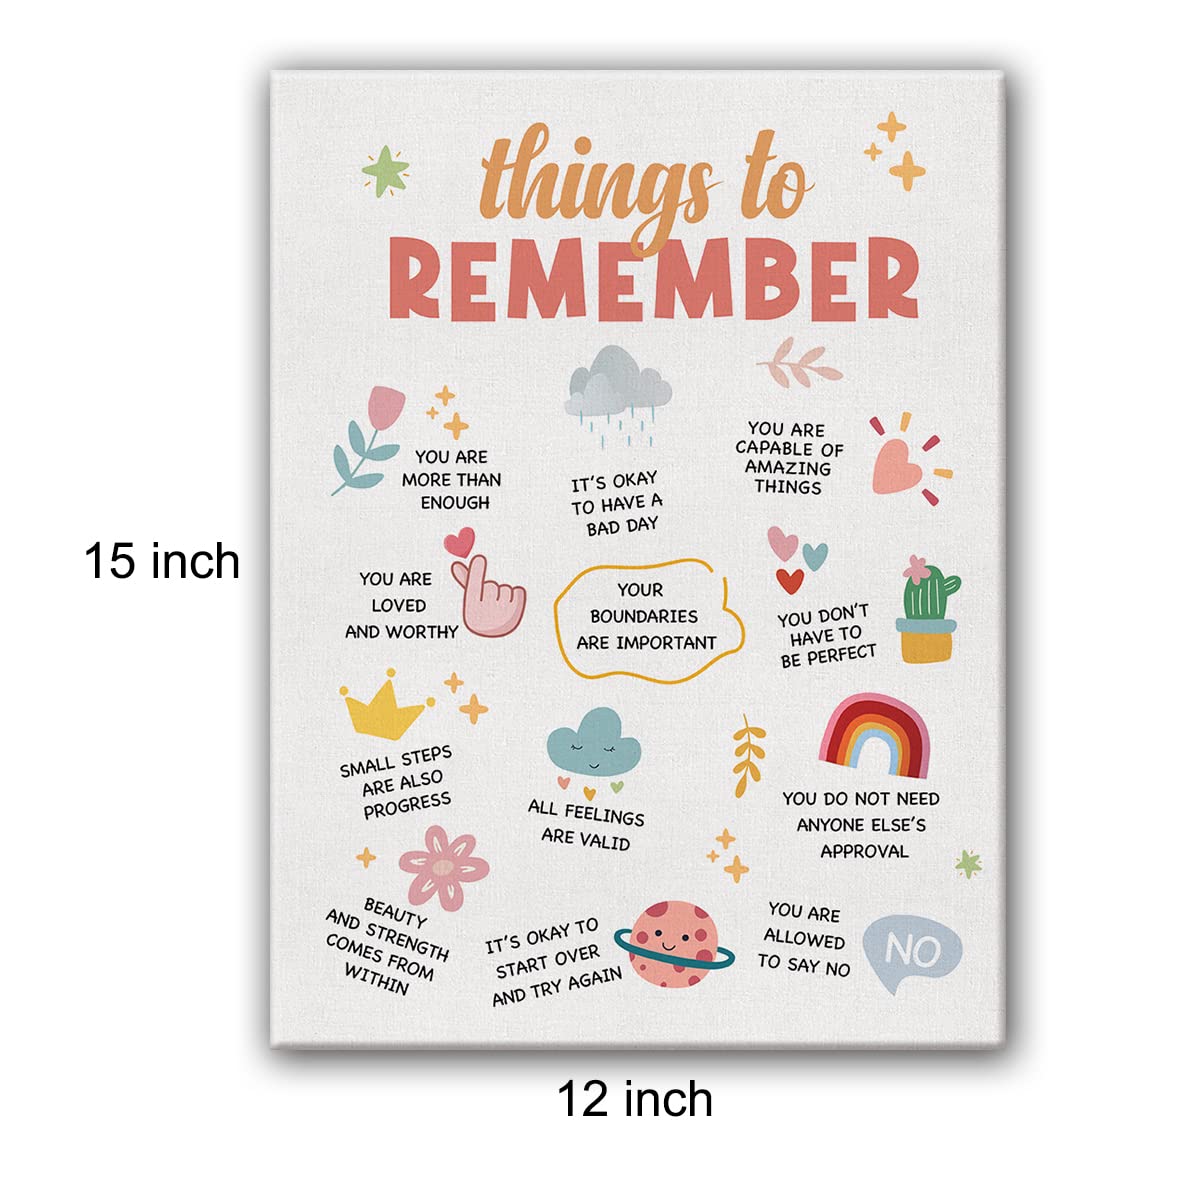 Yuzi-n Positive Things to Remember Print Poster Self Care Mental Health Painting Canvas Wall Art & Tabletop Decoration Home Therapy Artwork, Easel & Hanging Hook 12x15Inch